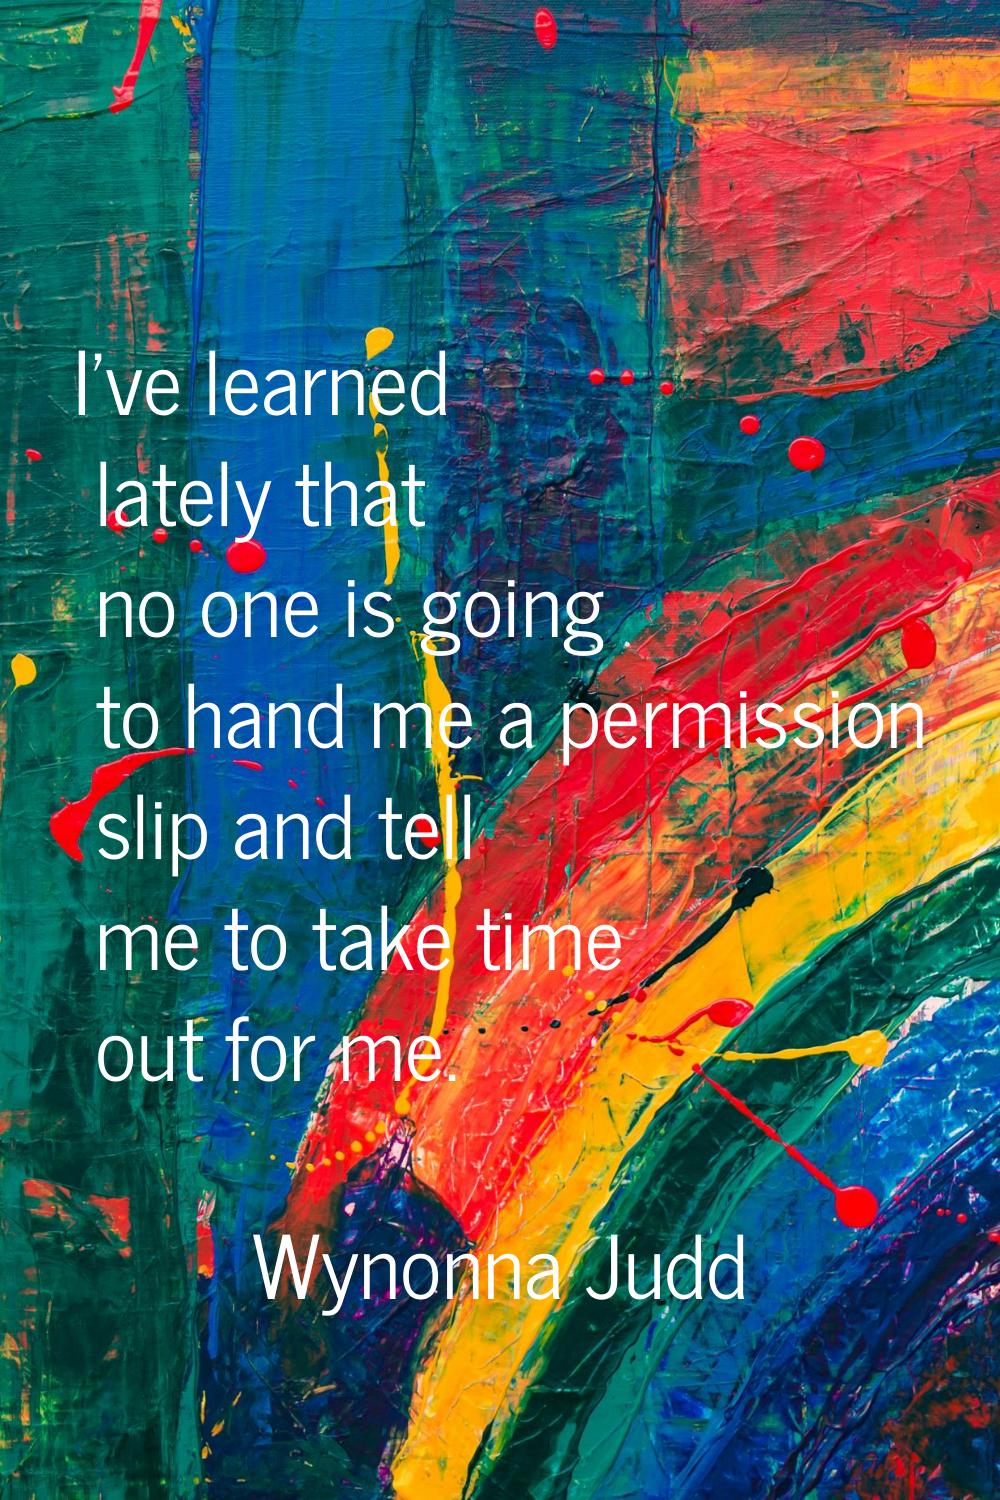 I've learned lately that no one is going to hand me a permission slip and tell me to take time out 